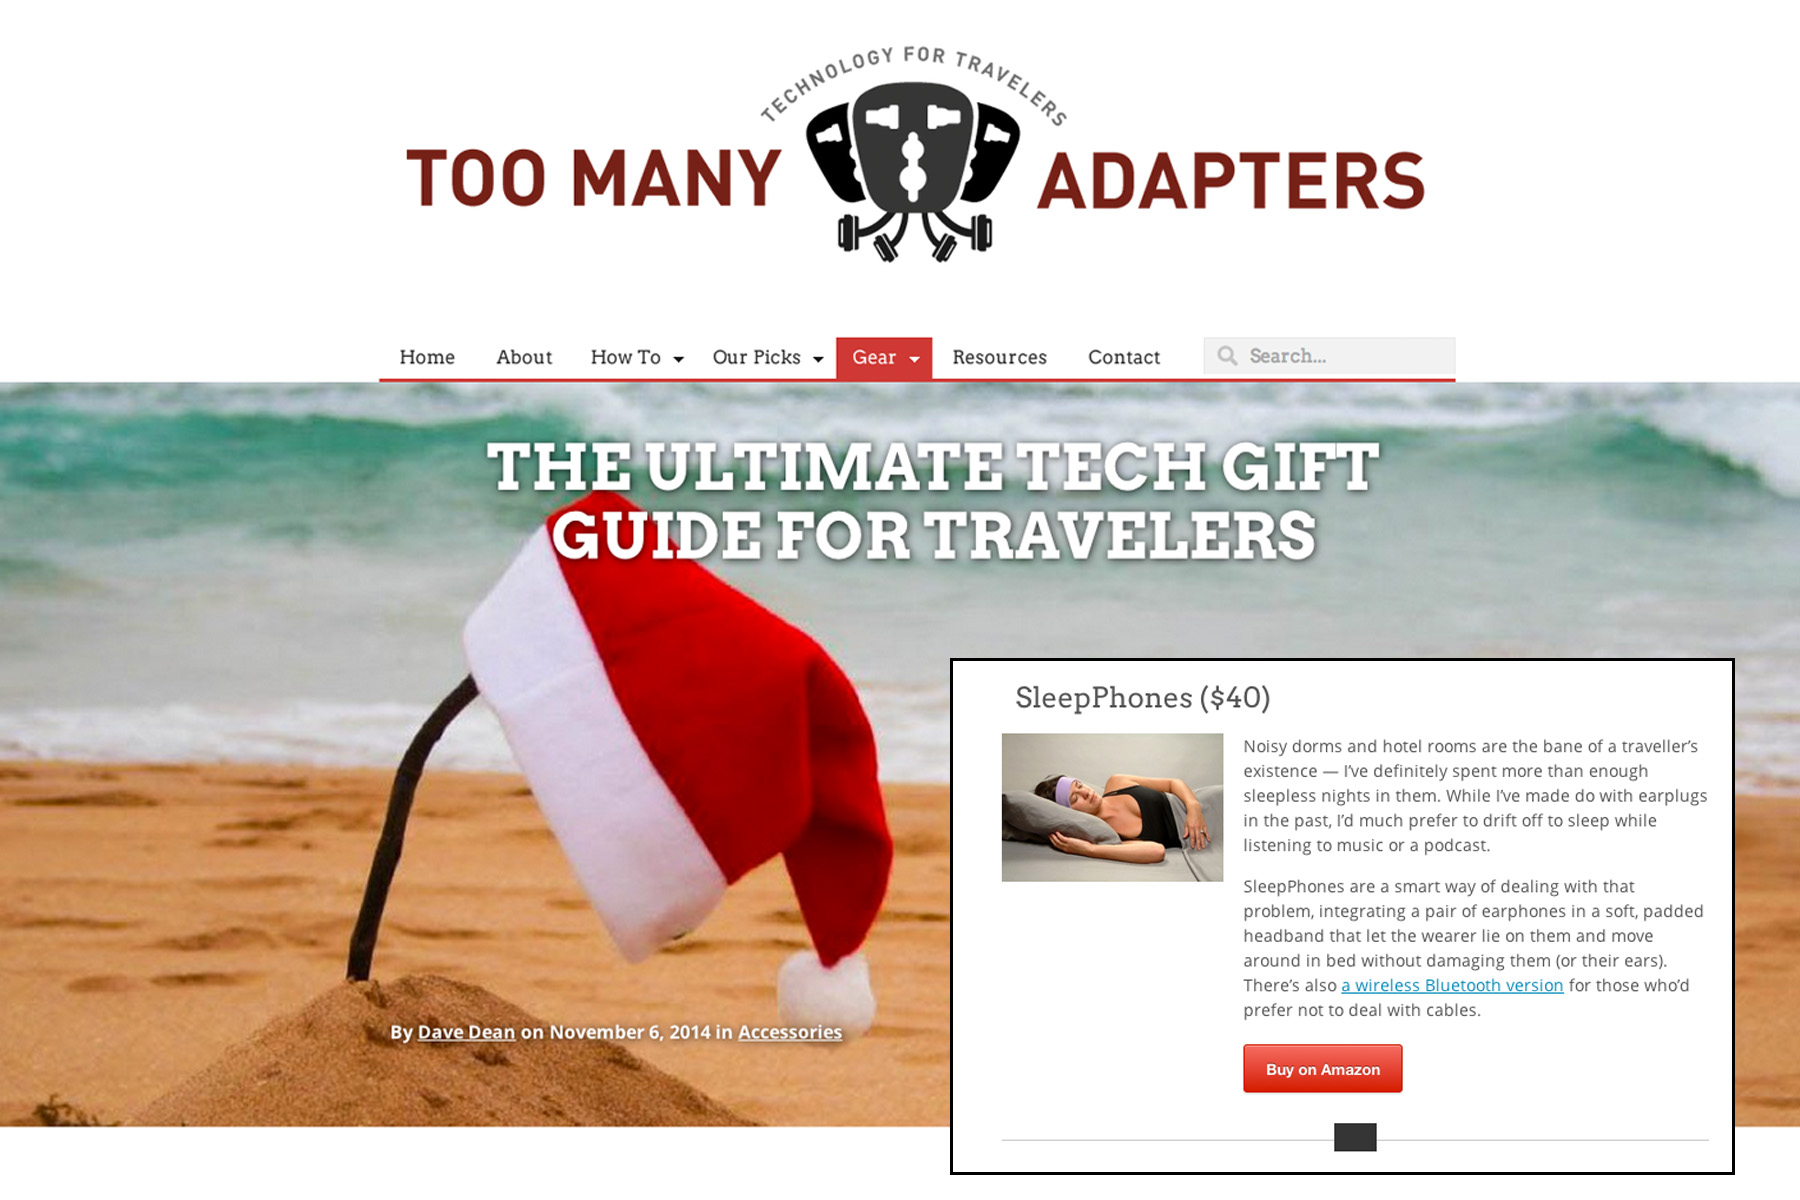 SleepPhones in The Ultimate Tech Gift Guide for Travelers, Gifts under $50